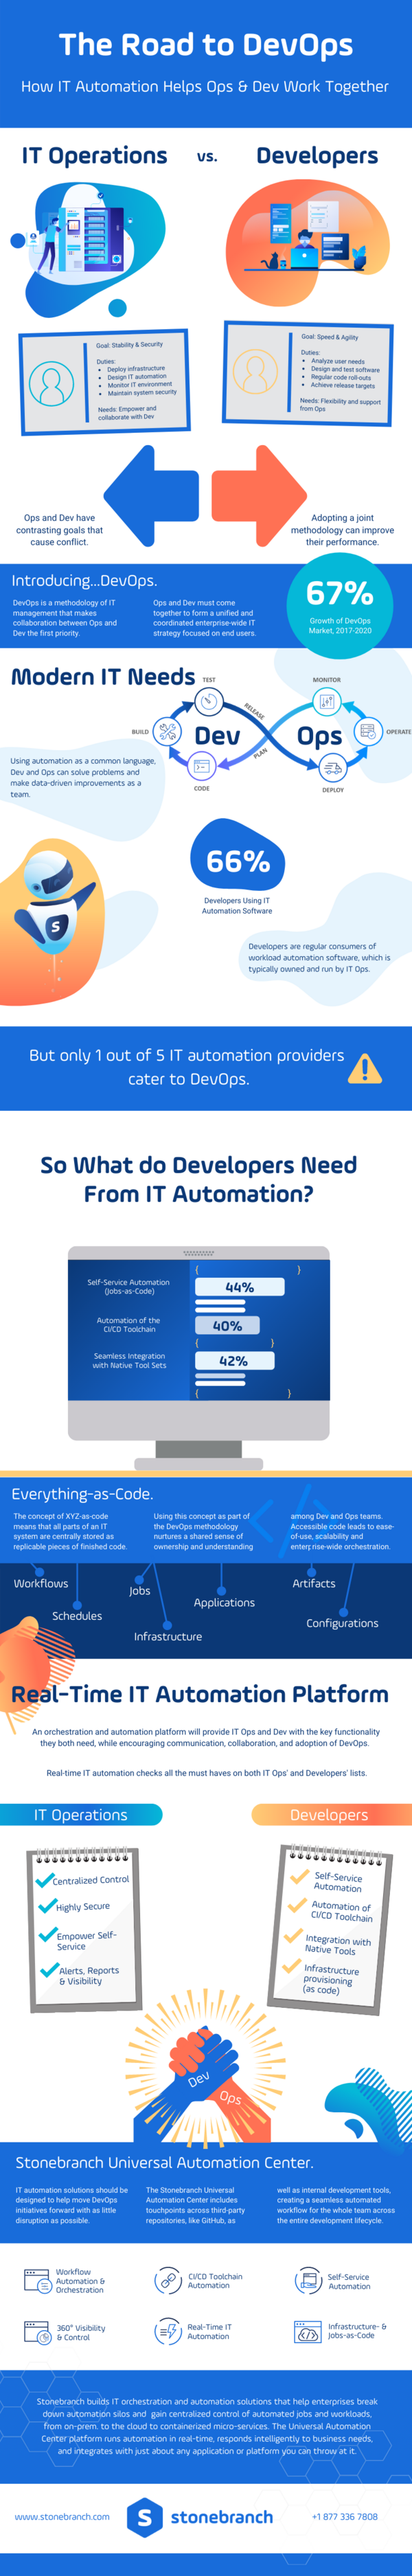 road to devops infographic it ops developers